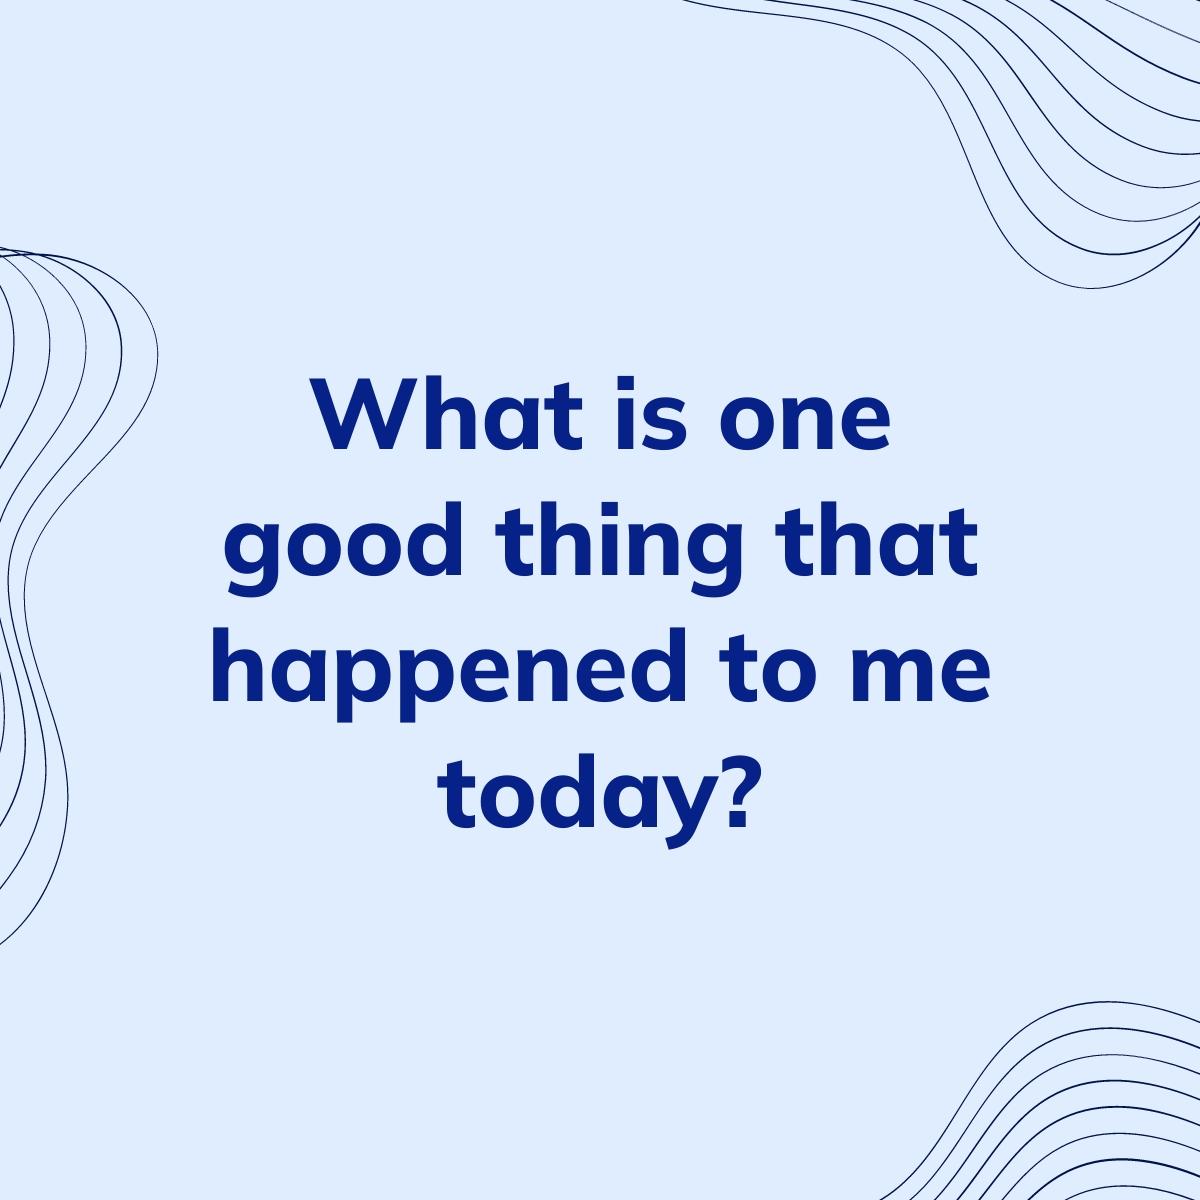 Journal Prompt: What is one good thing that happened to me today?